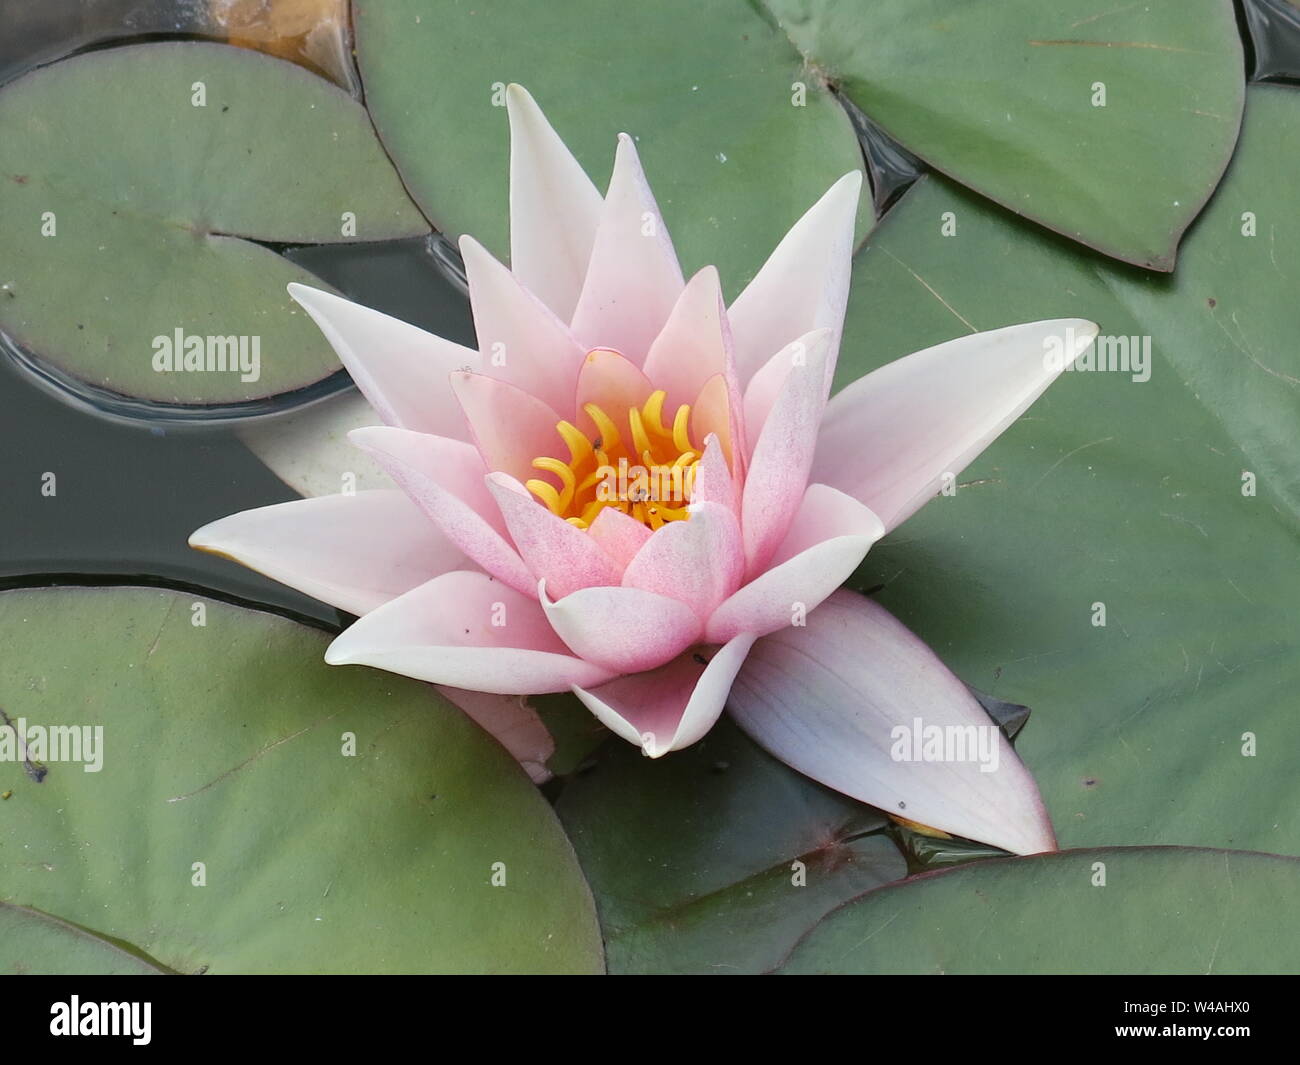 Close-up of a single flower in bloom of Laydekeri Lilacea, a stunning pinkish water lily surrounded by broad green lily pads. Stock Photo